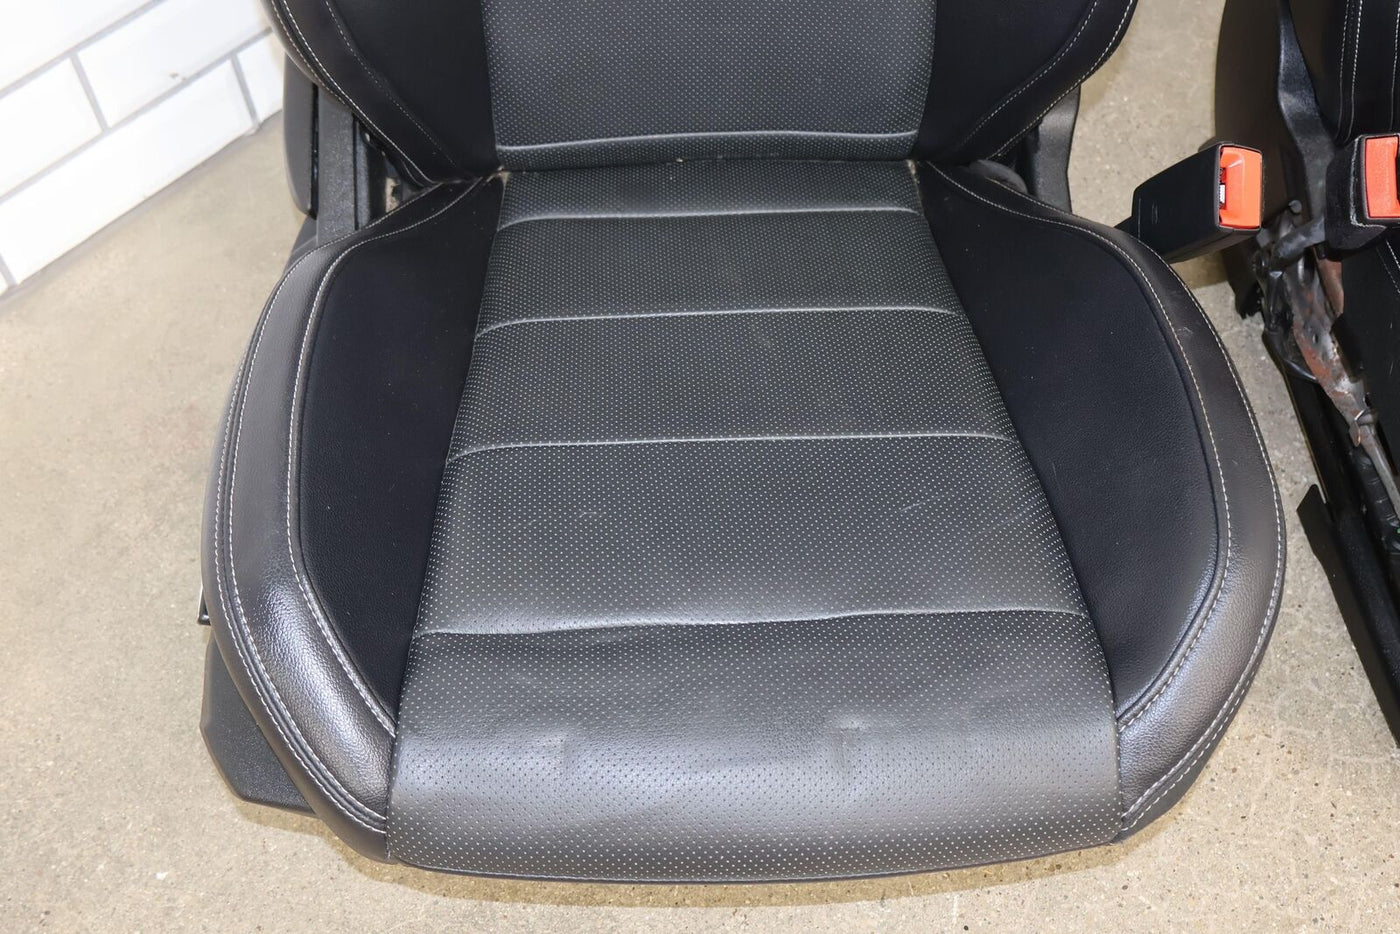 15-17 Ford Mustang GT Coupe Heated/Cooled Leather Seats Set (Ebony) Blown Bags